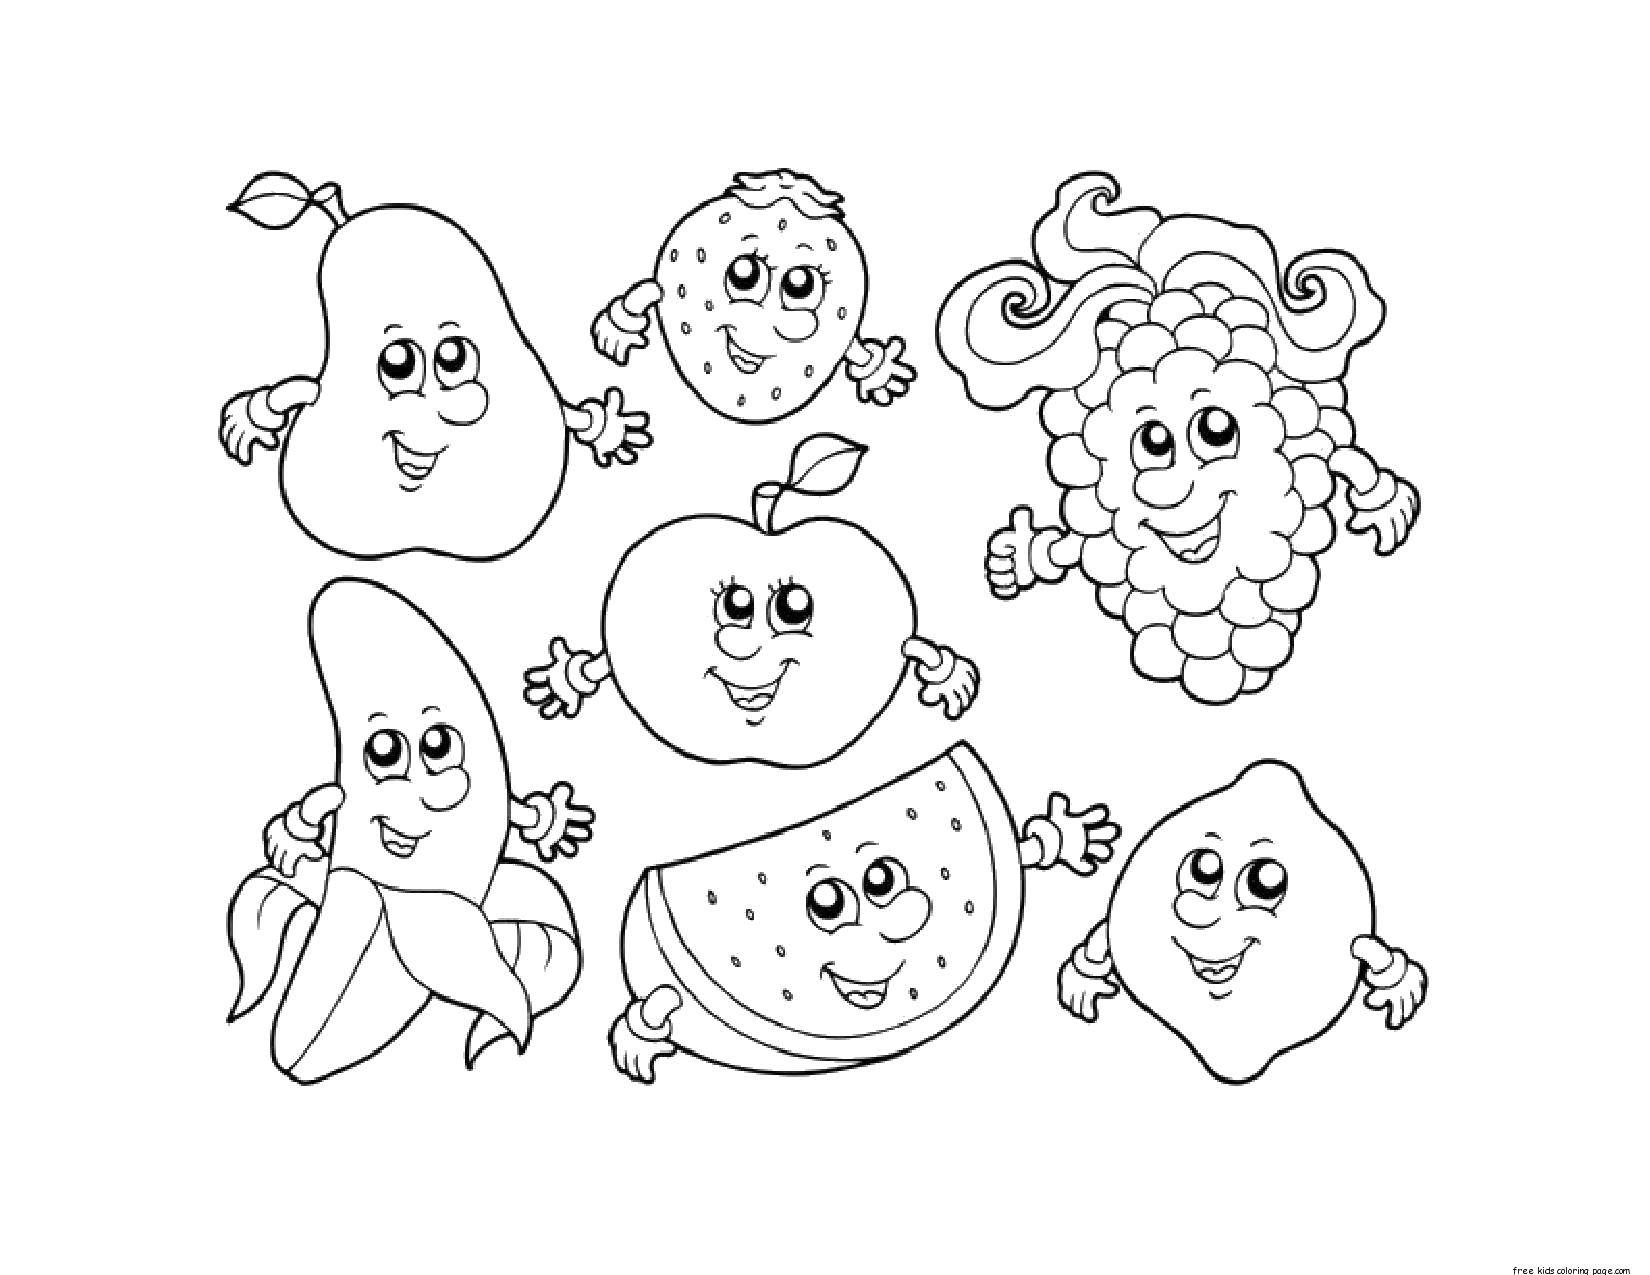 Coloring Happy fruktiki. Category Fruits. Tags:  fruits.